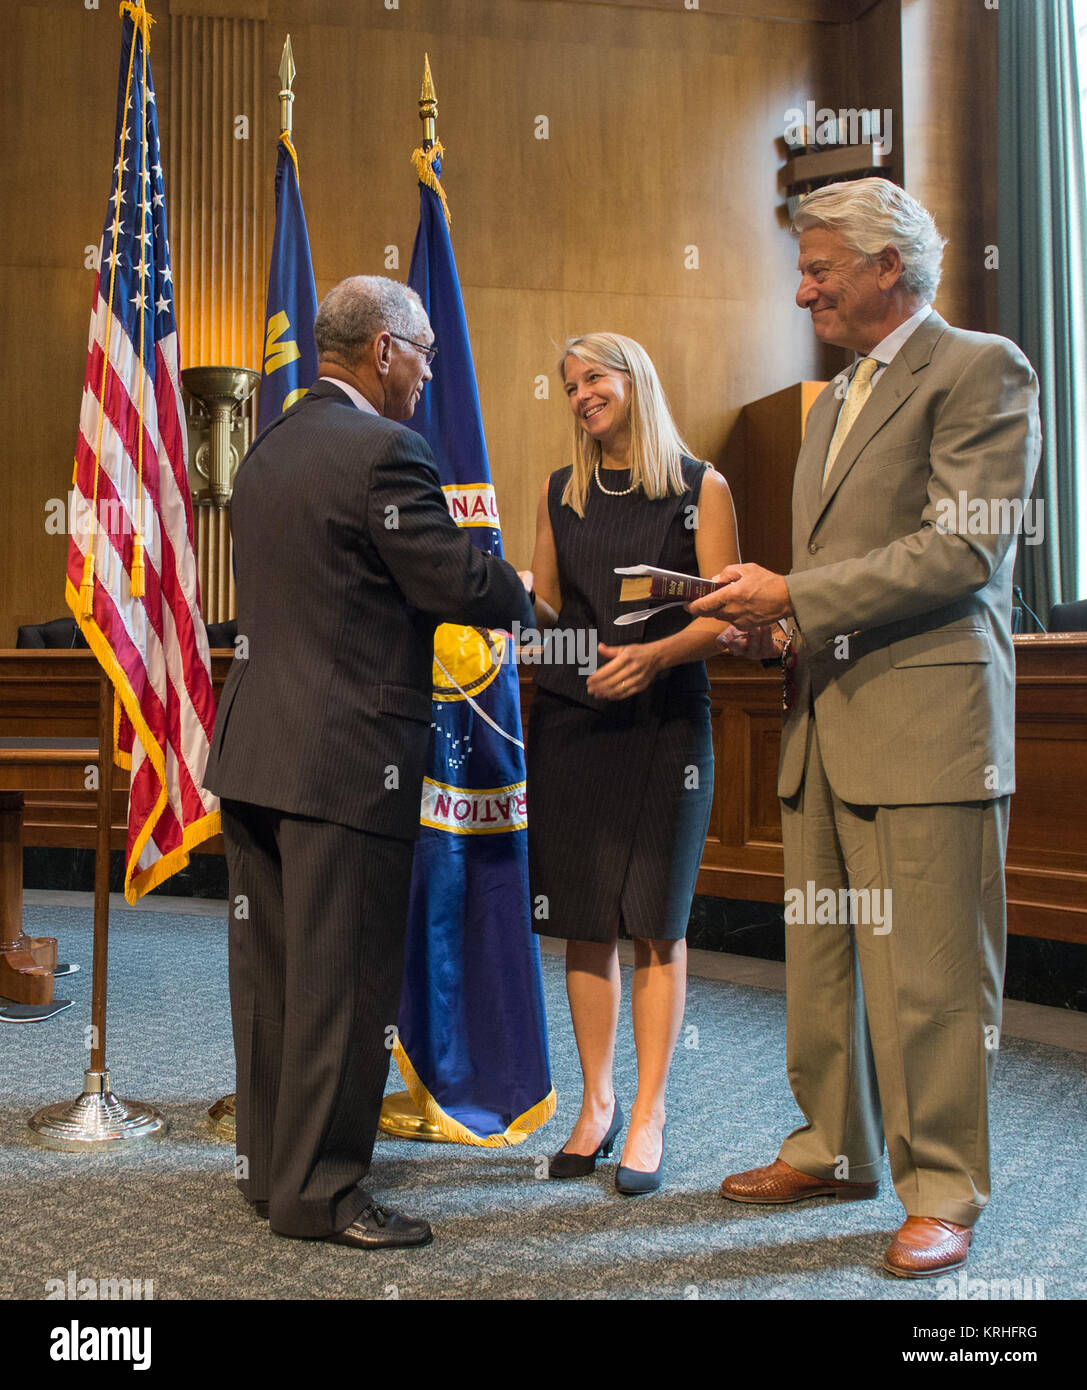 Dr. Dava J. Newman is ceremonially sworn-in as NASA Deputy Administrator by NASA Administrator Charles Bolden, as her husband, Guillermo Trotti, holds the Bible, Tuesday, July 14, 2015 at the Dirksen Senate Office Building in Washington. The event was hosted by Sen. Steve Daines, R-Mont., and Sen. Jon Tester, D-Mont.  Photo Credit: (NASA/Joel Kowsky) Dr. Dava J. Newman Ceremonial Swearing-In (201507140017HQ) Stock Photo